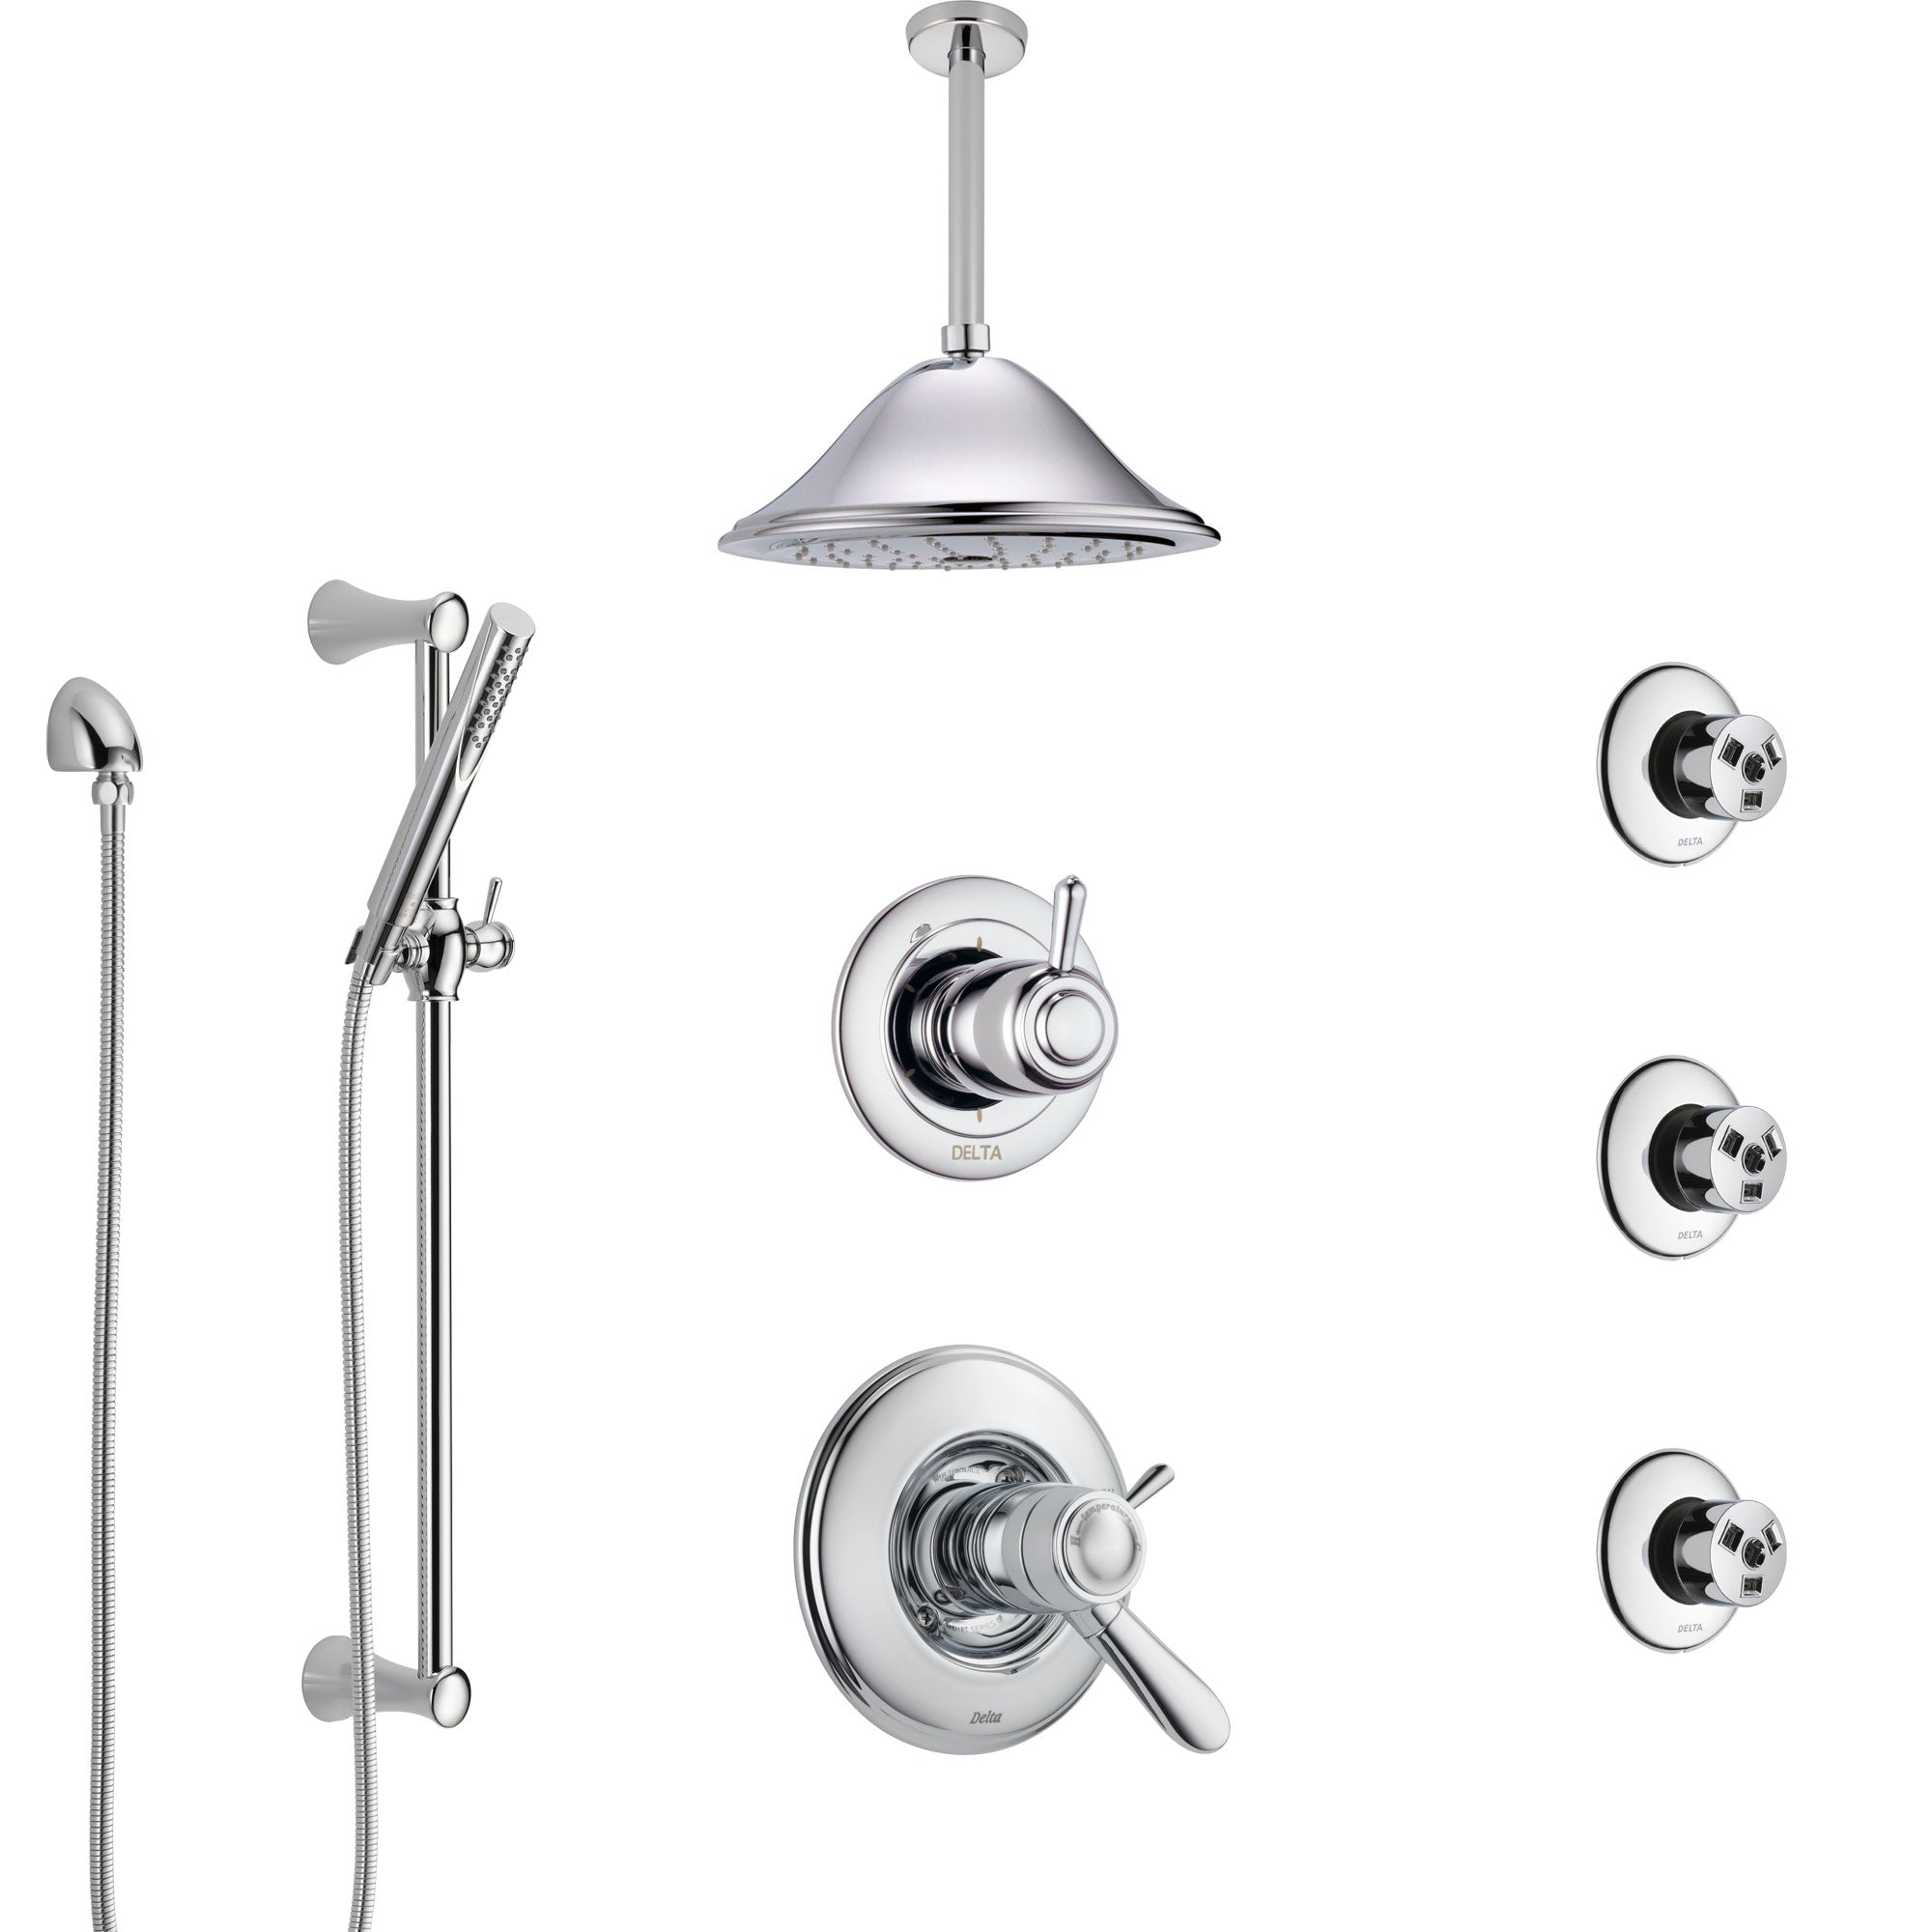 Delta Lahara Chrome Shower System with Dual Thermostatic Control, Diverter, Ceiling Mount Showerhead, 3 Body Sprays, and Hand Shower SS17T3824